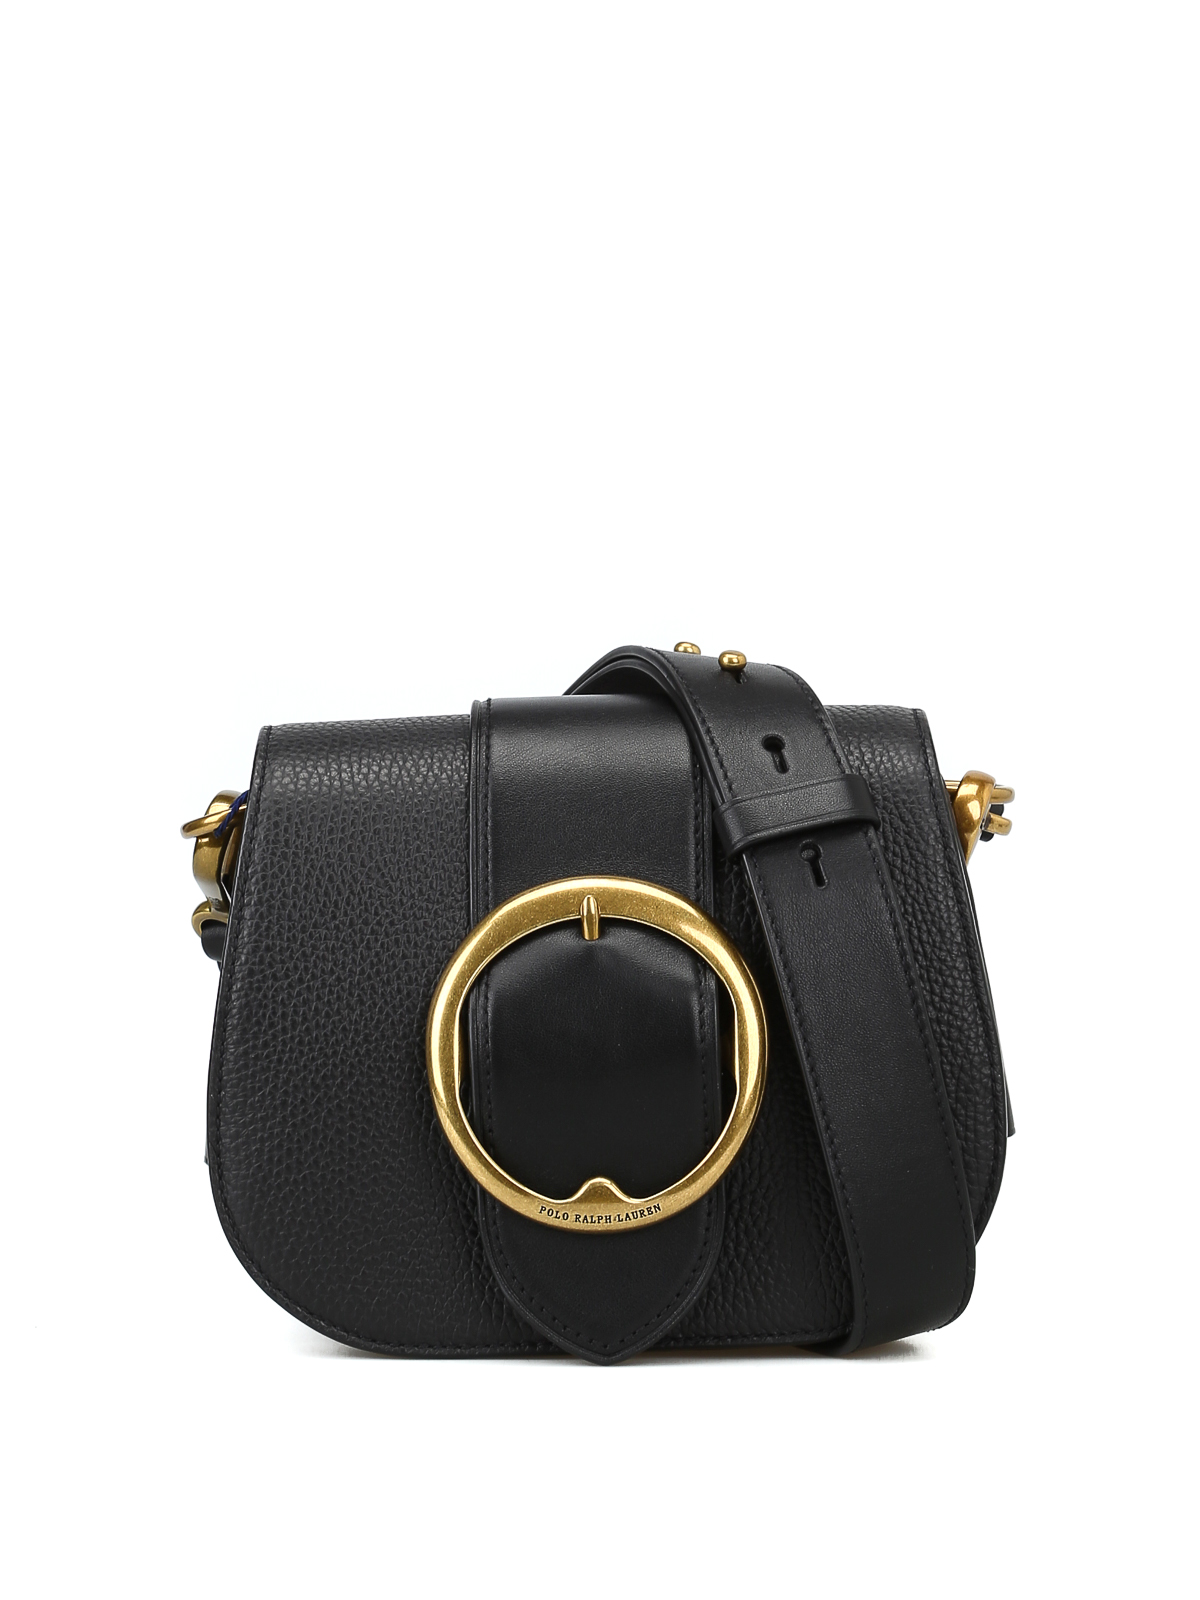 Cross body bags Polo Ralph Lauren - Black hammered leather saddle bag ...